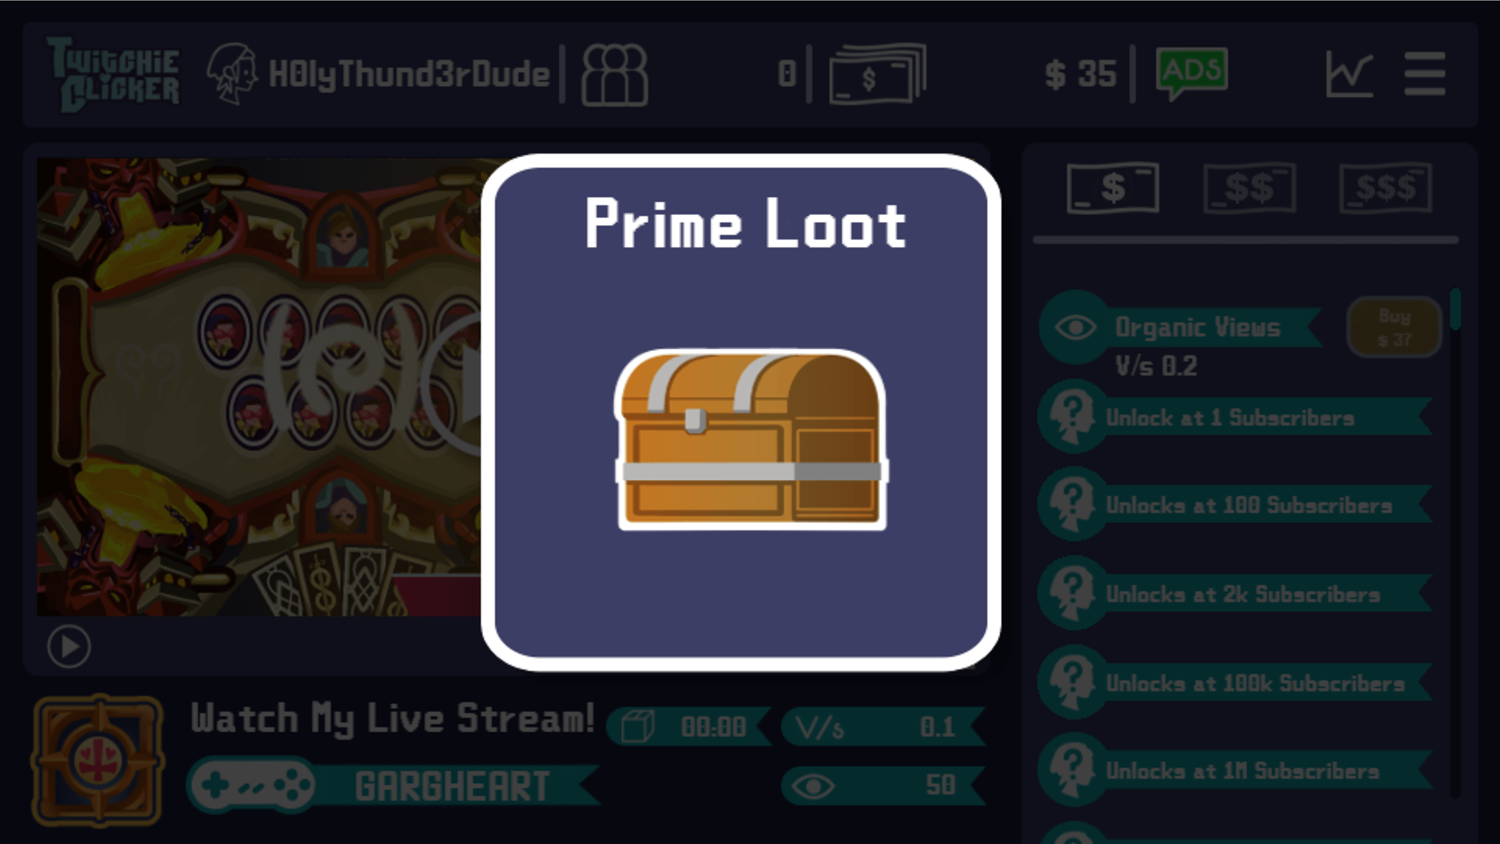 Twitchie Clicker Game Prime Loot Screenshot.